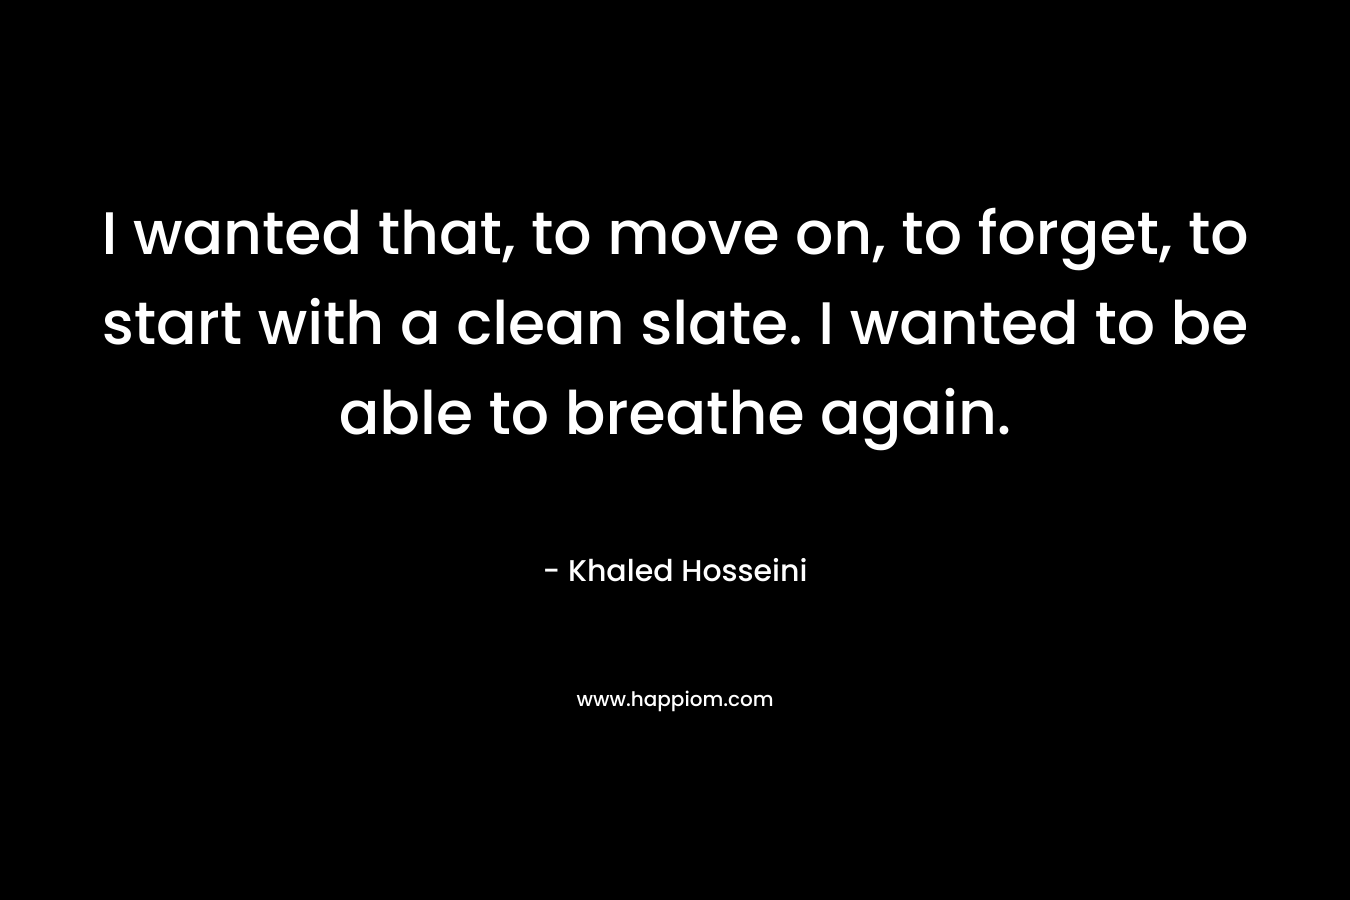 I wanted that, to move on, to forget, to start with a clean slate. I wanted to be able to breathe again.